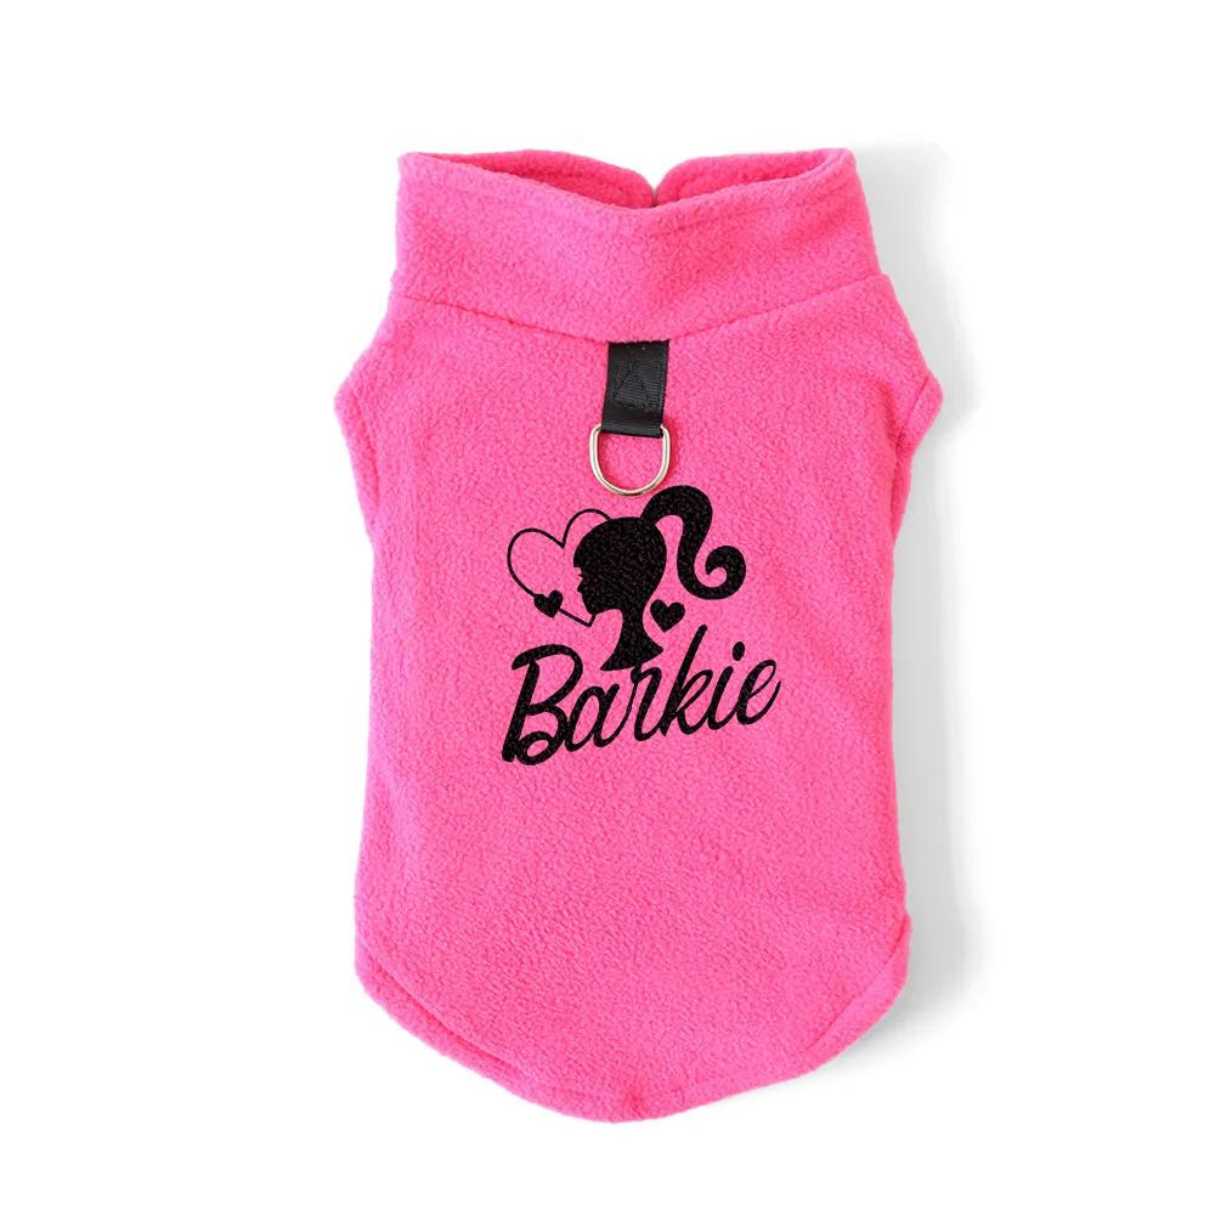 Barkie Doll vest, jacket, clothing Pink with black writing on it for dogs with barbie on it